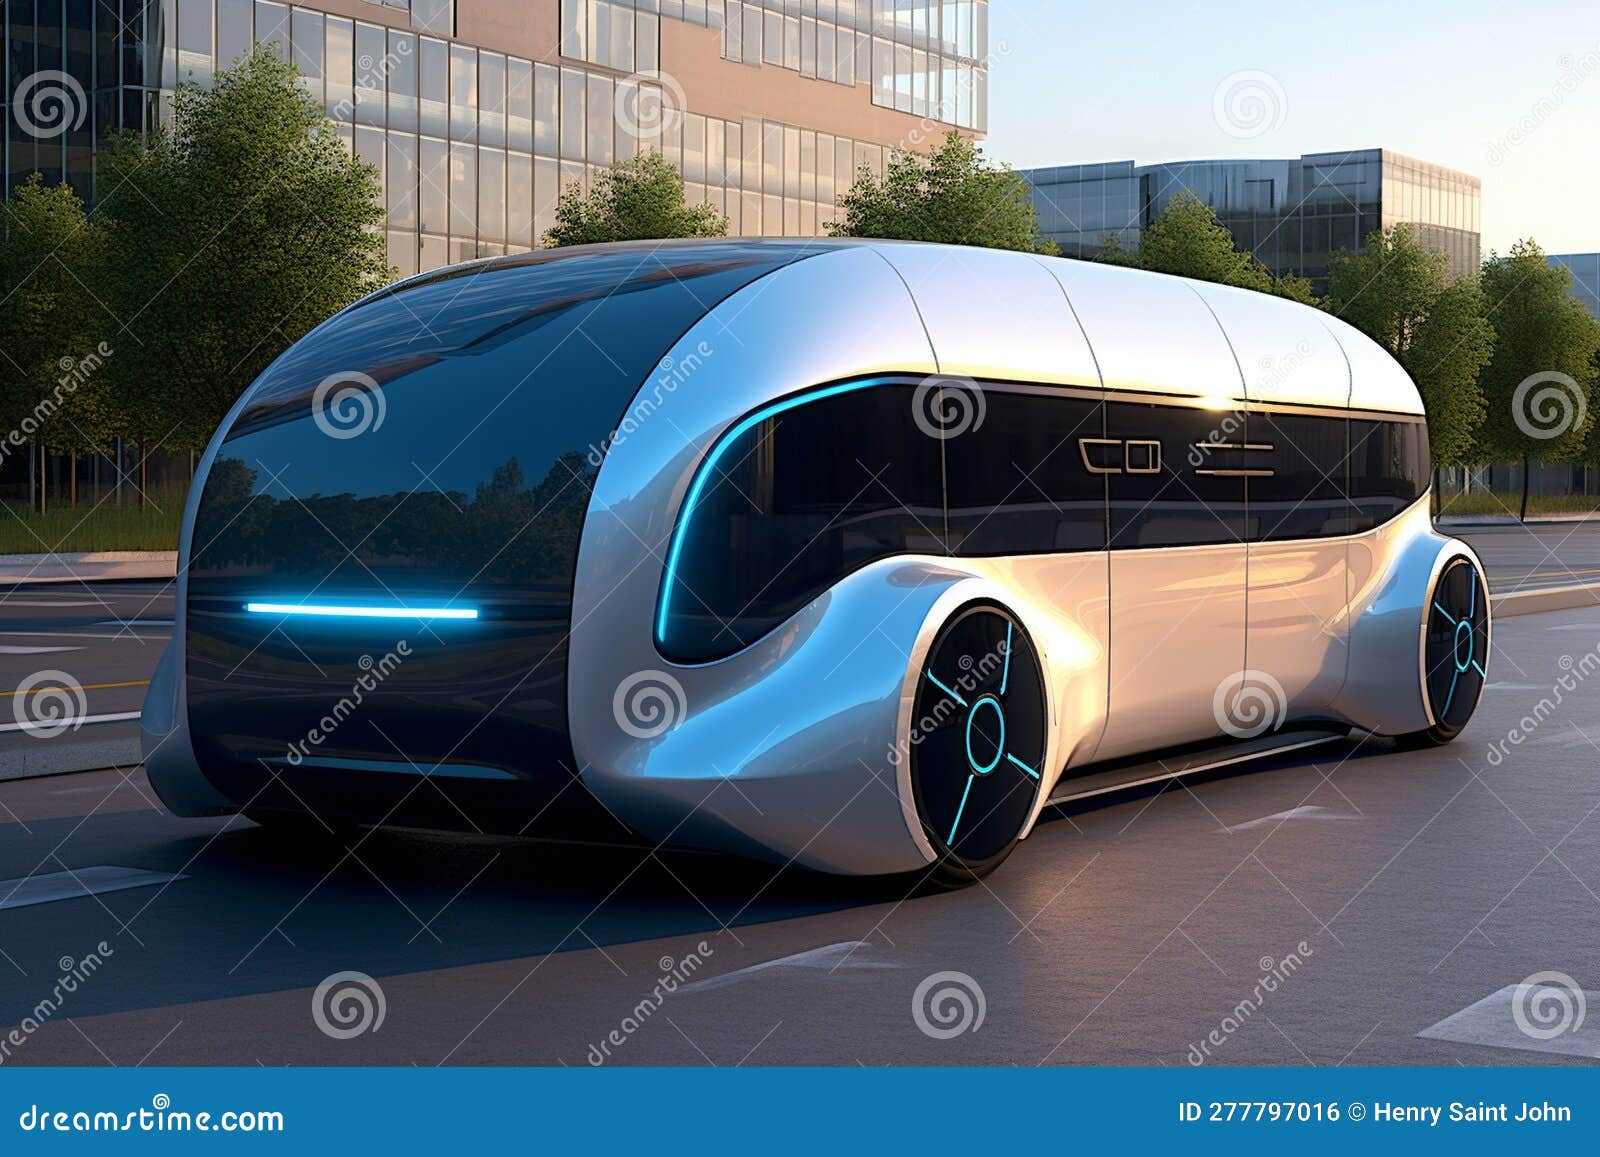 future of mobility: photorealistic renderings of innovative transportation solutions